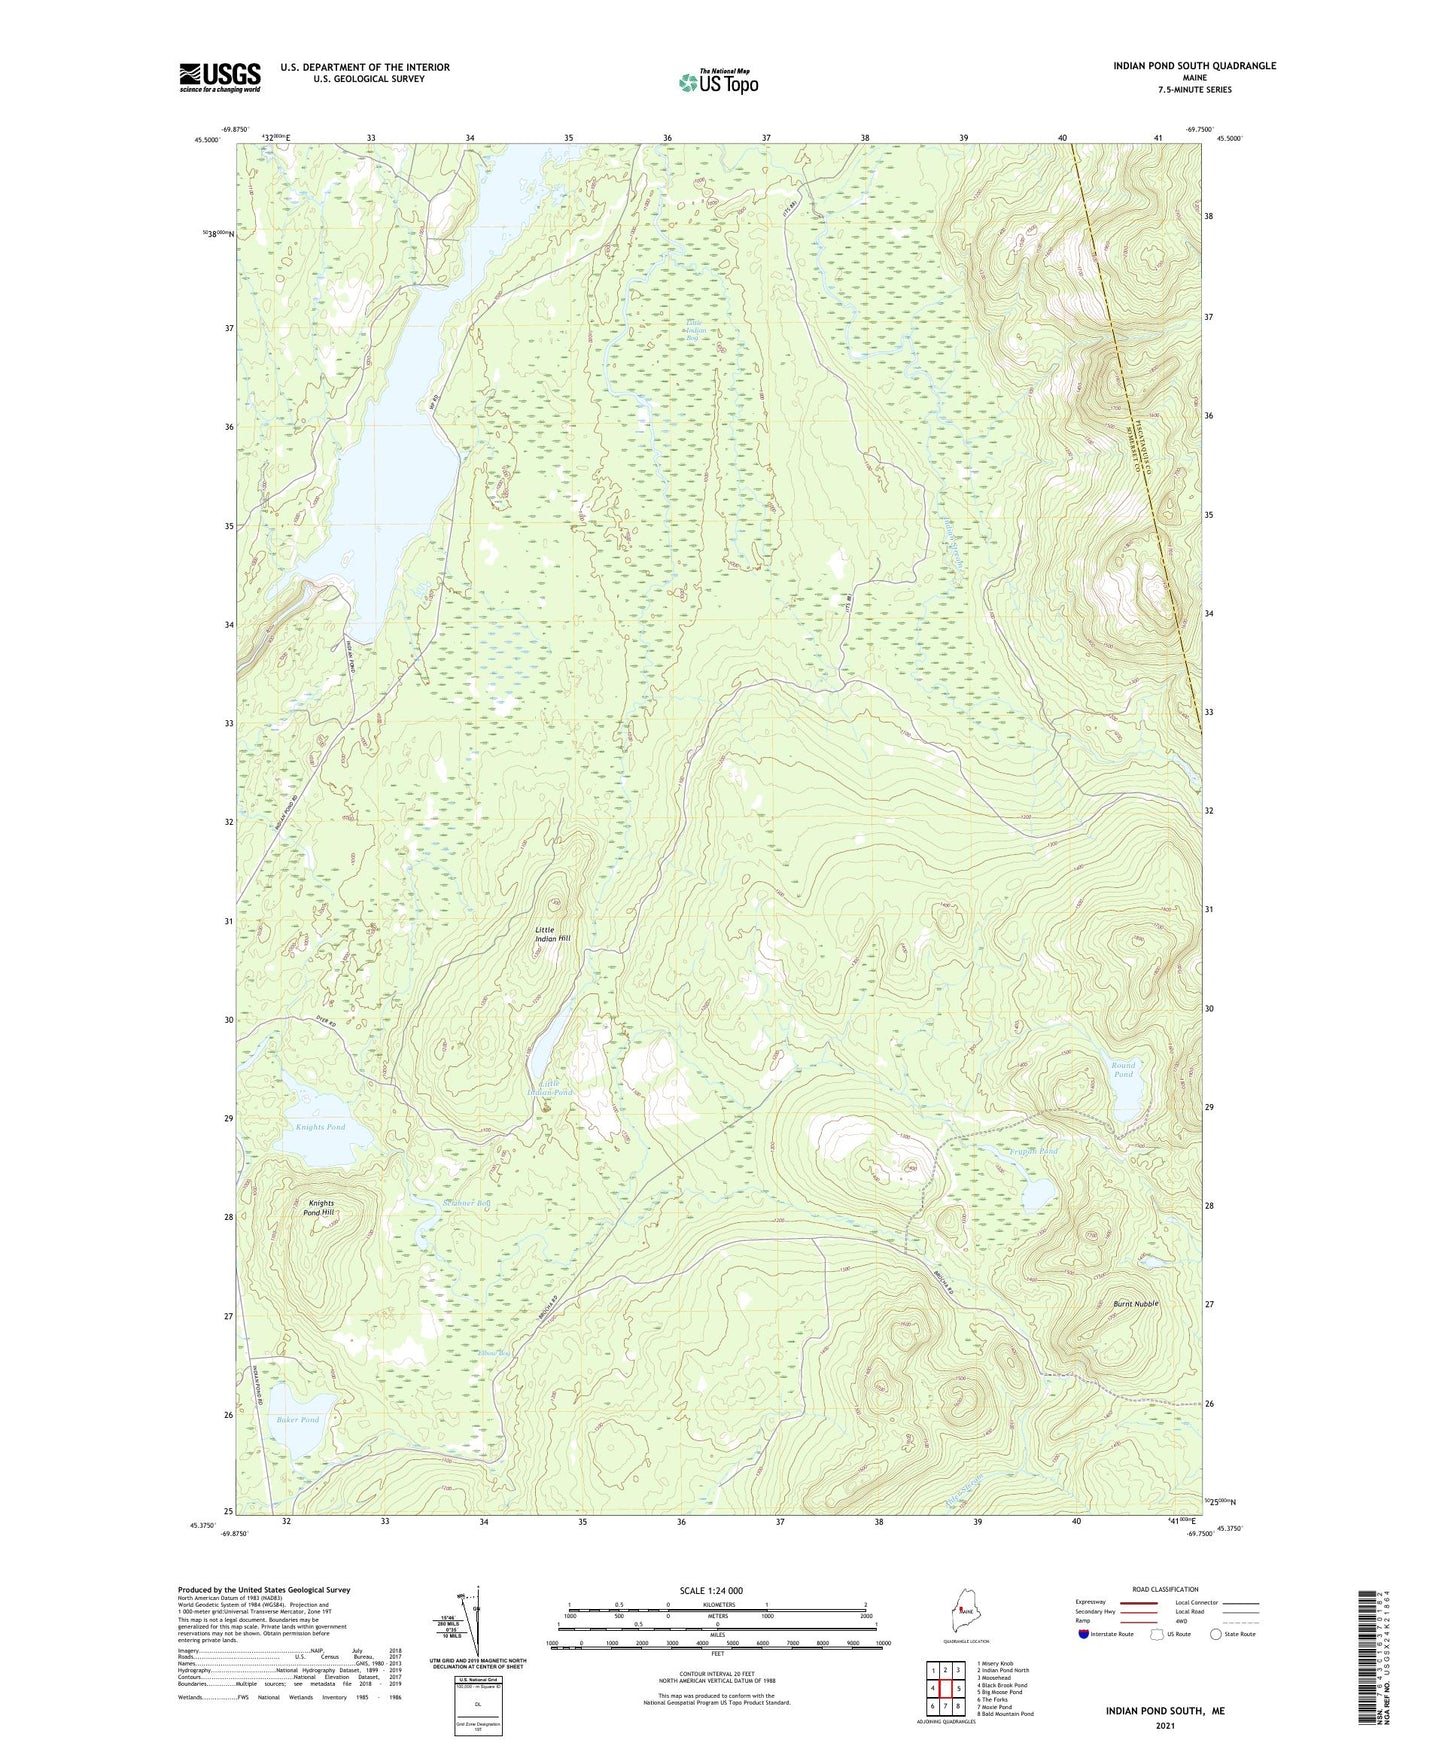 Indian Pond South Maine US Topo Map Image